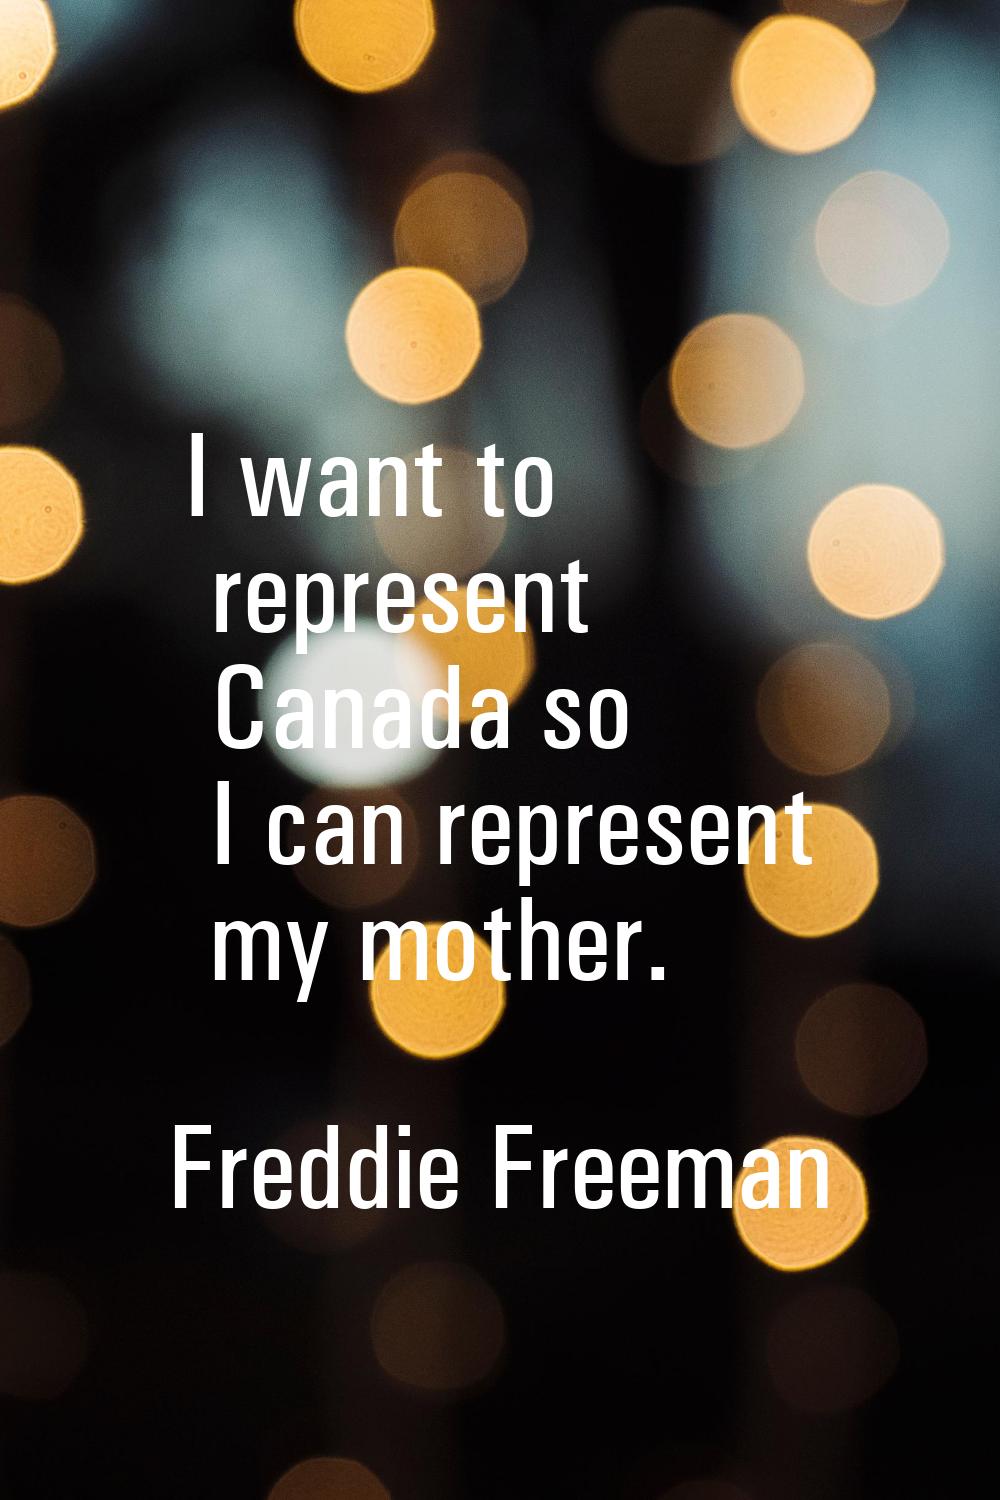 I want to represent Canada so I can represent my mother.